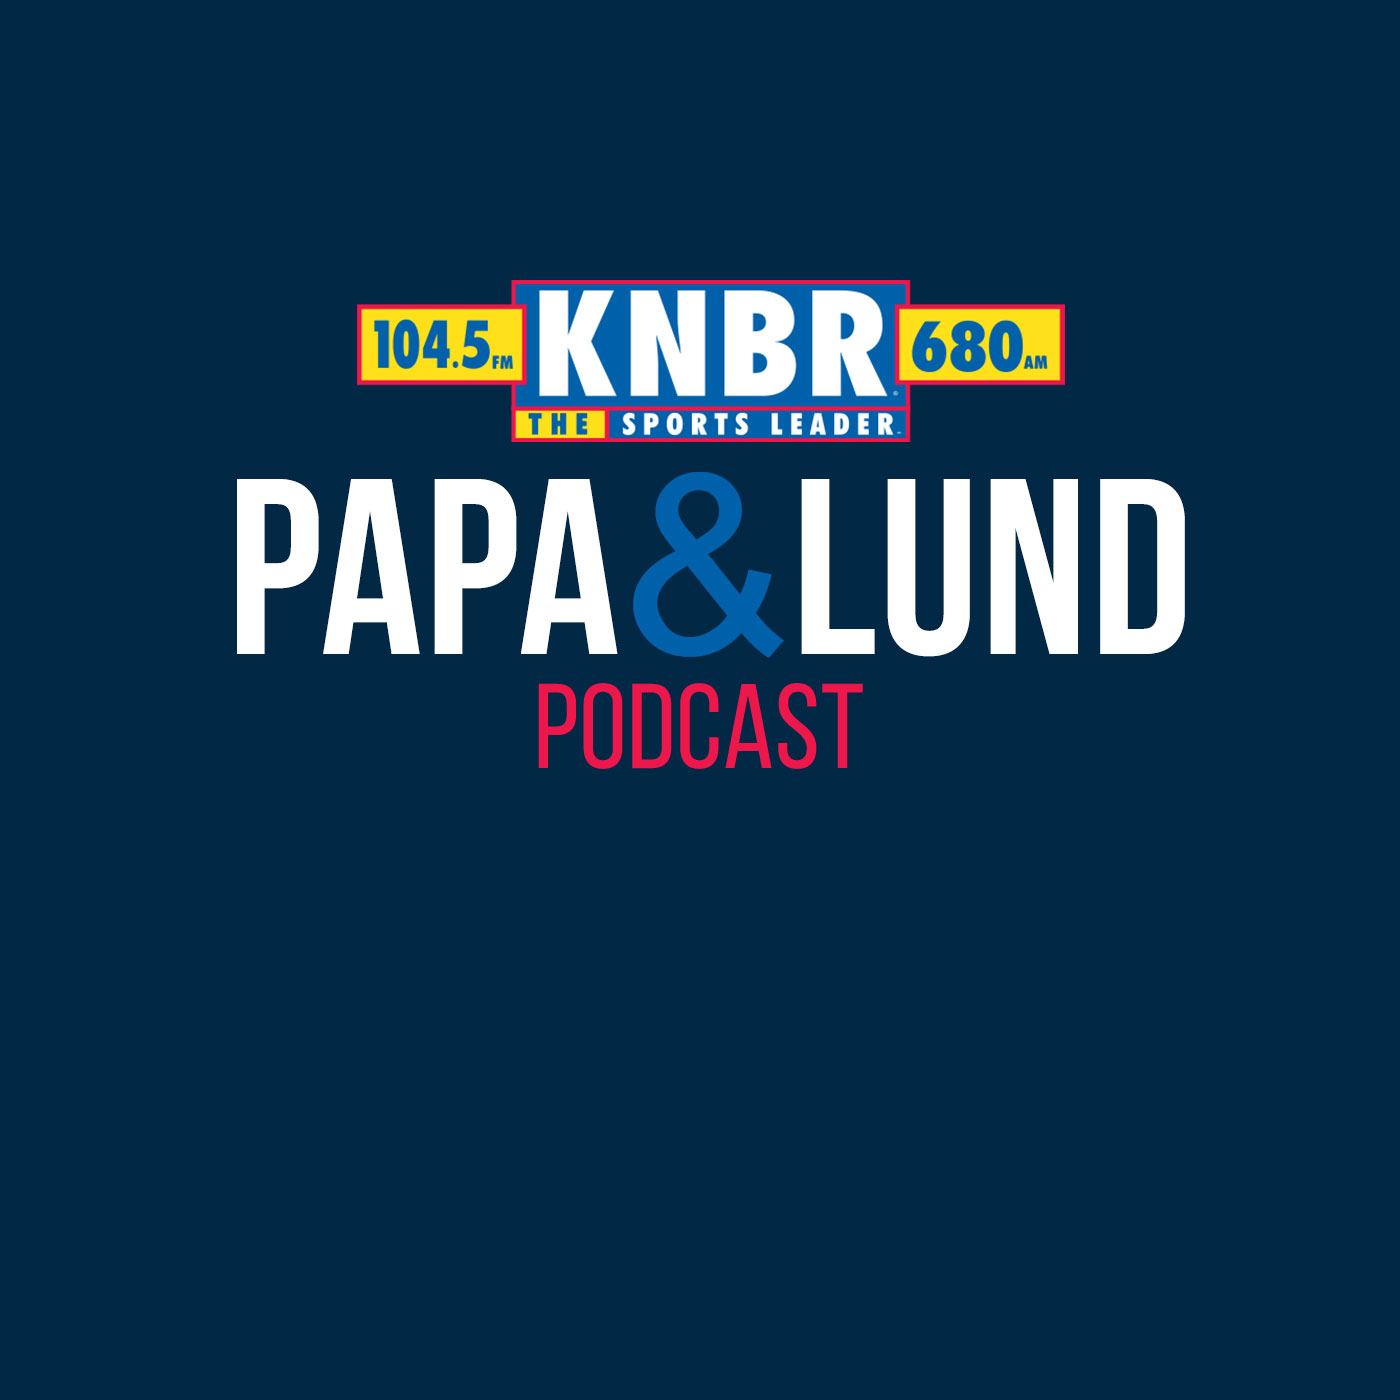 3-6 Papa & Lund Show - Hour 4 - Papa & Lund discuss the Giants need for more pitching and look at potential candidates to help fill the void, booth inside and outside of the organization